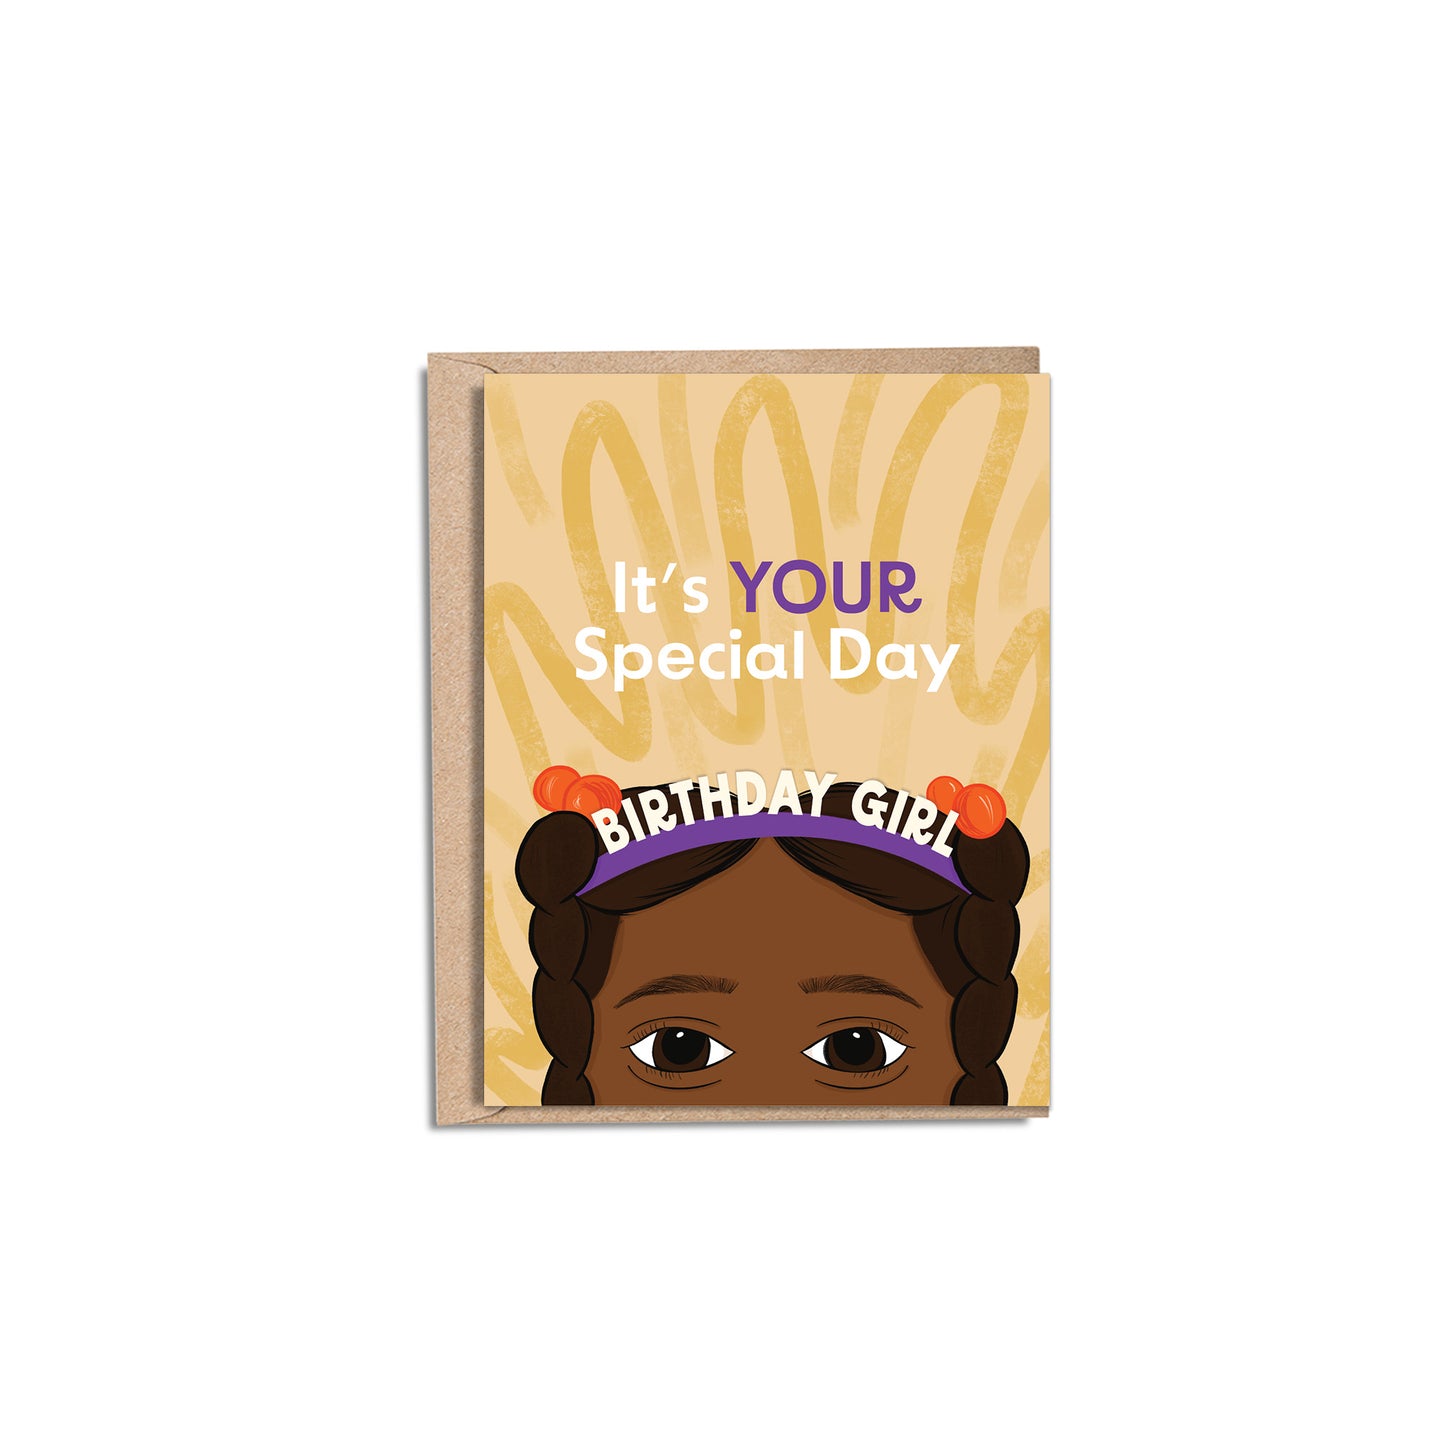 Birthday Girl 4.25x5.5”, celebrate, birthday card for little girls, cards for Black Girls, brown girl greeting cards from Goods Made By Digitrillnana, Ashley Fletcher. Black Woman Owned. Perfect card for a birthday gift!